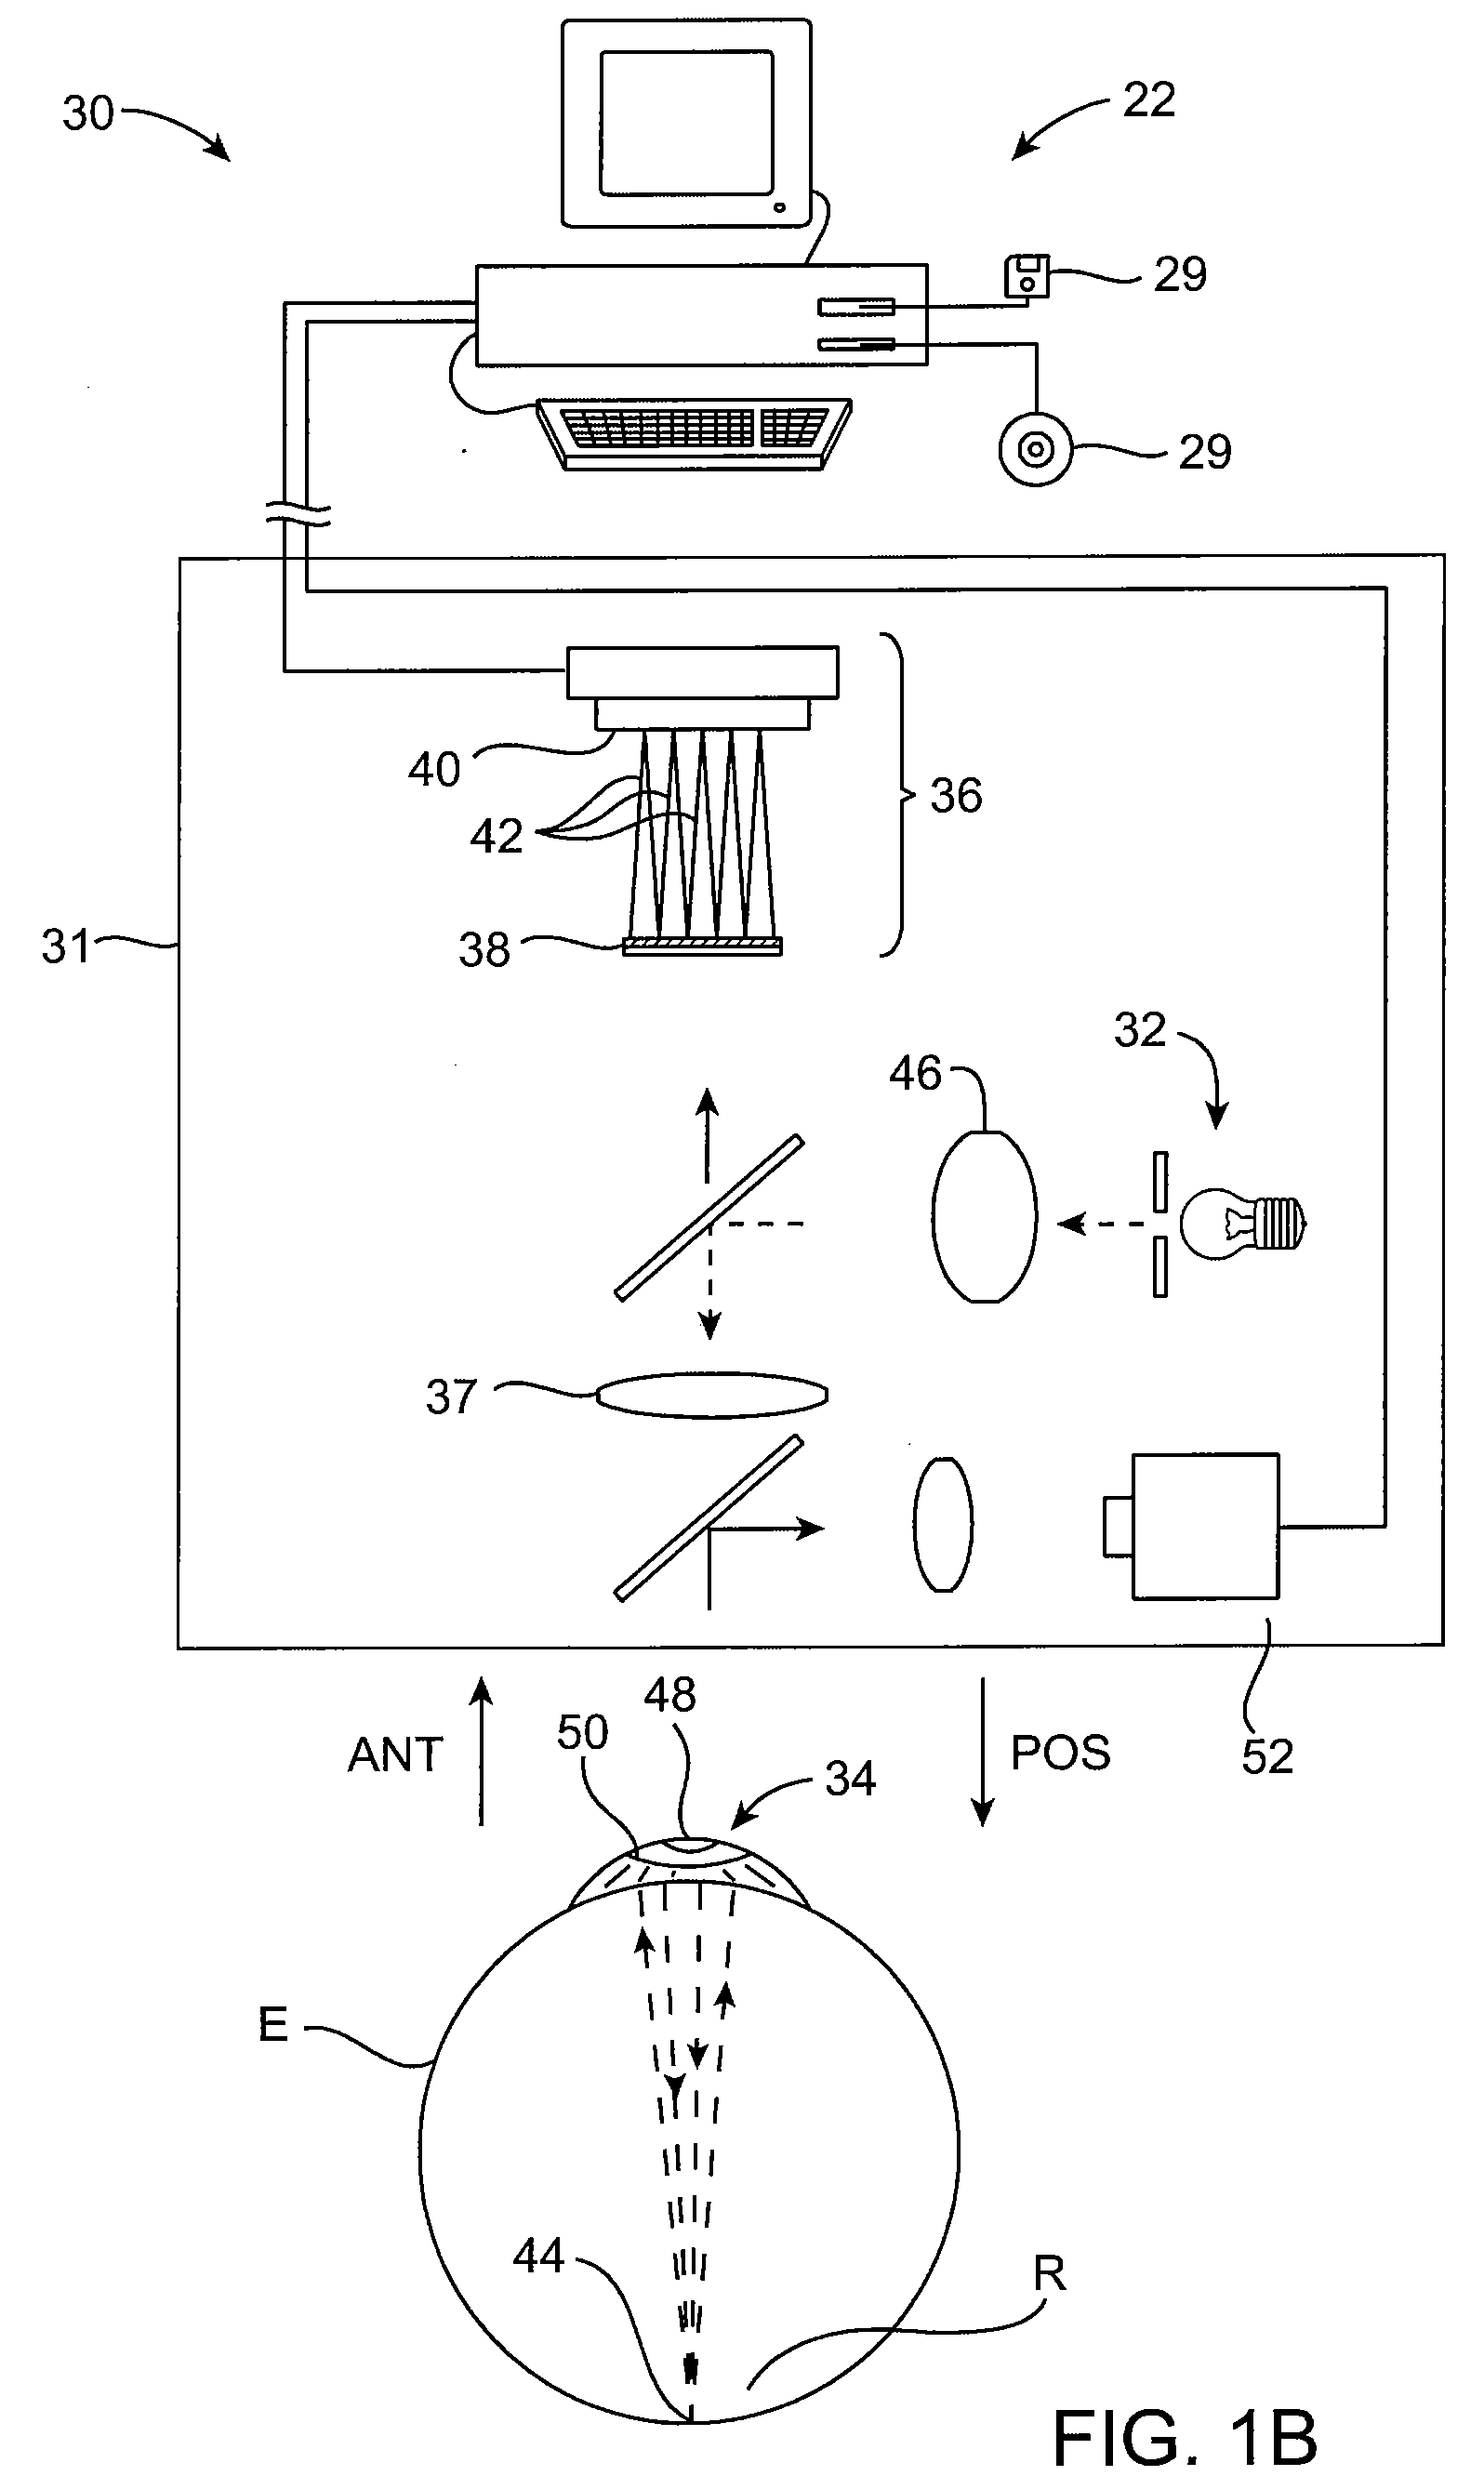 Auto-Alignment and Auto-Focus System and Method